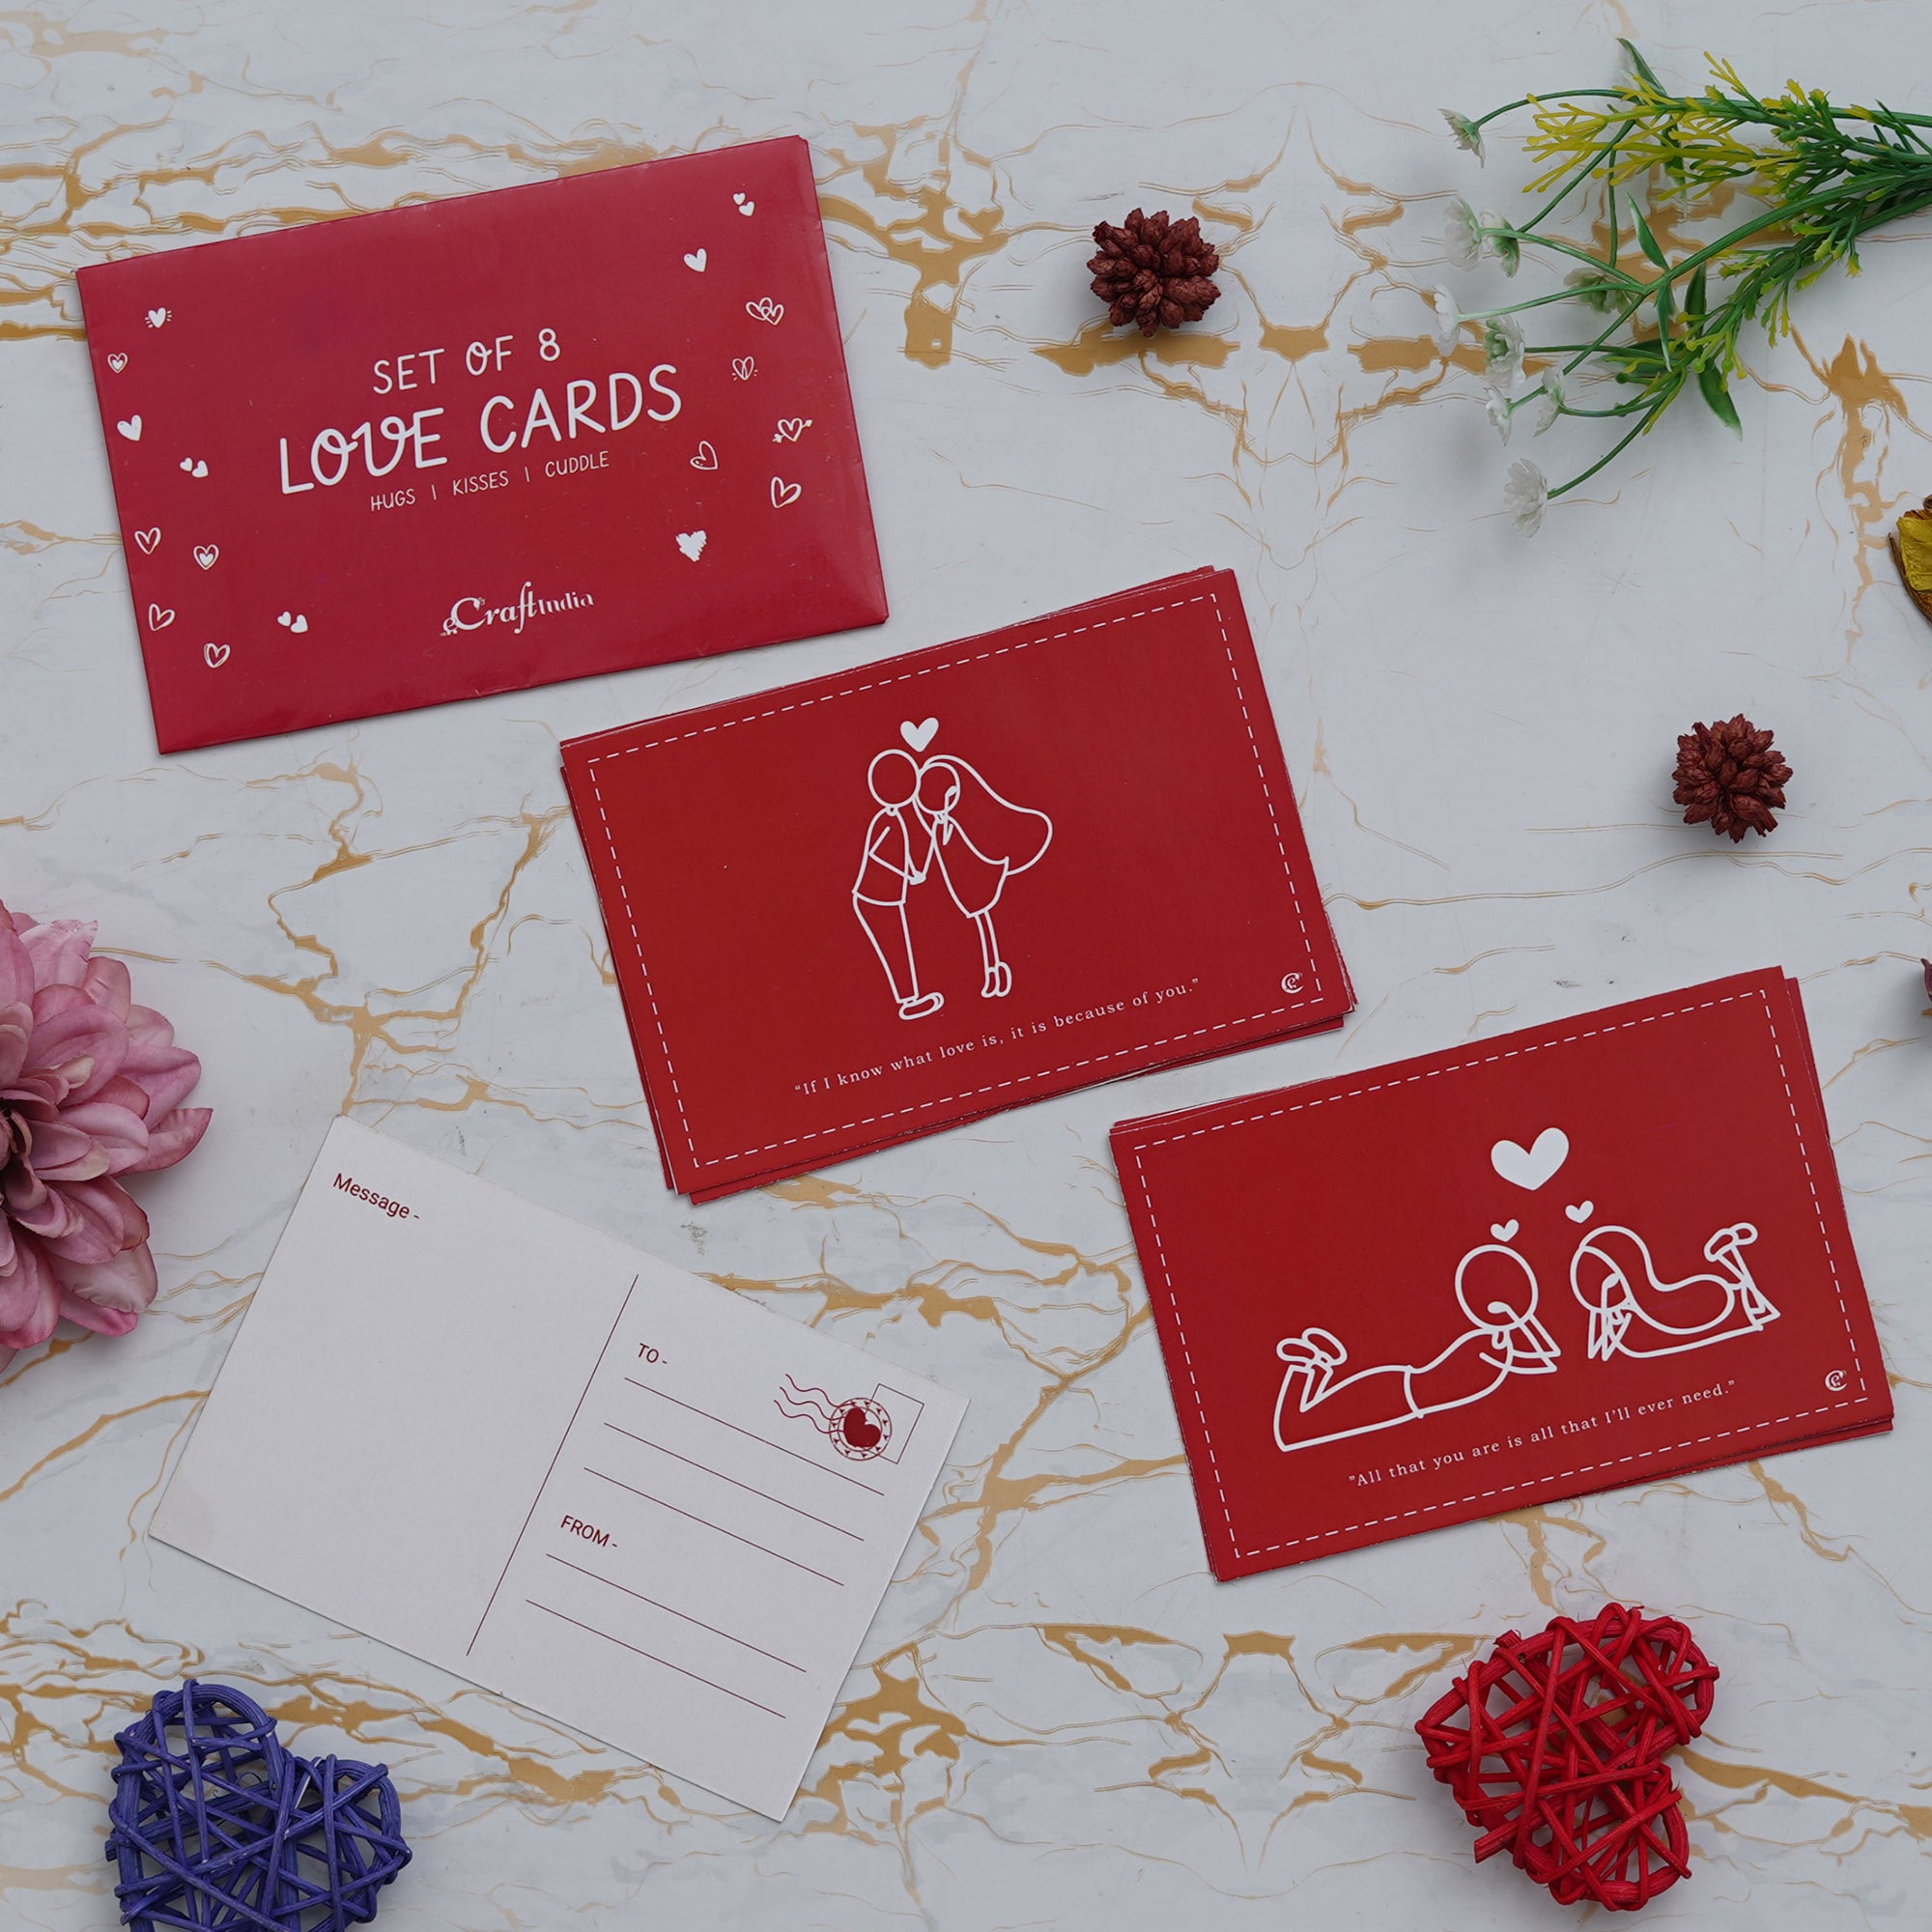 Valentine Combo of Pack of 8 Love Gift Cards, Red and White Heart Hugging Each Other Gift Set 1